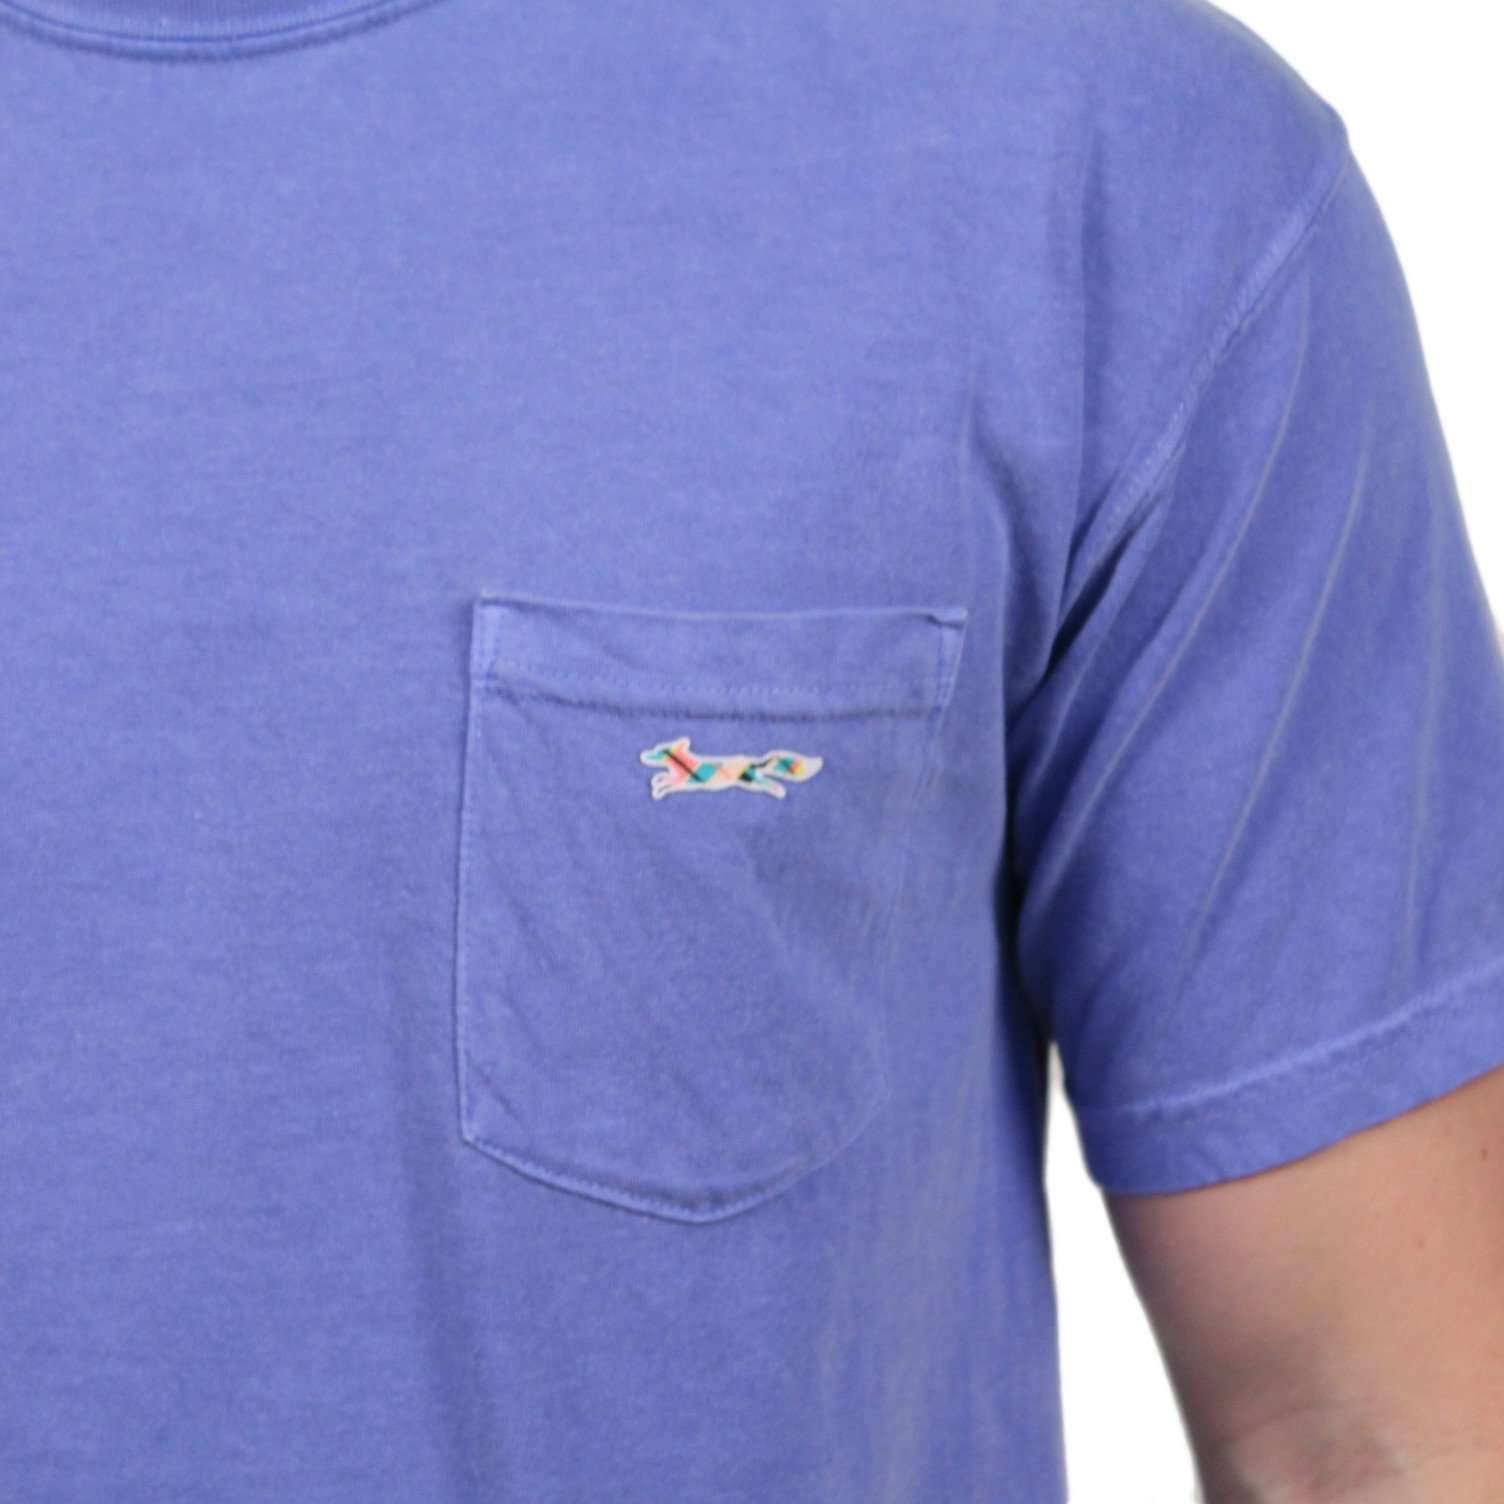 Longshanks Sewn Patch Short Sleeve Pocket Tee in Flo Blue by Country Club Prep - Country Club Prep